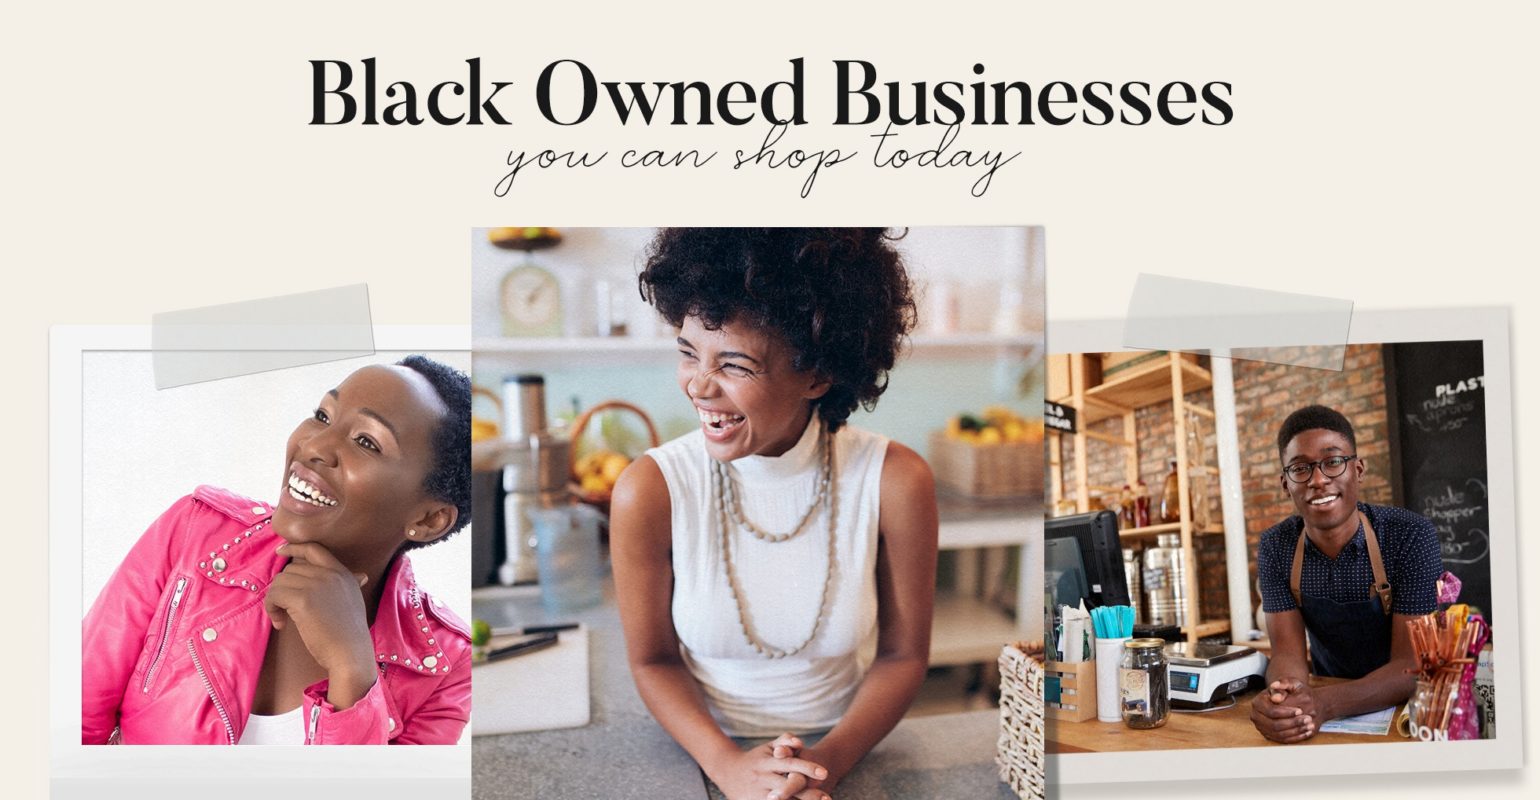 24 Black Owned Businesses You Can Shop Today in 2021